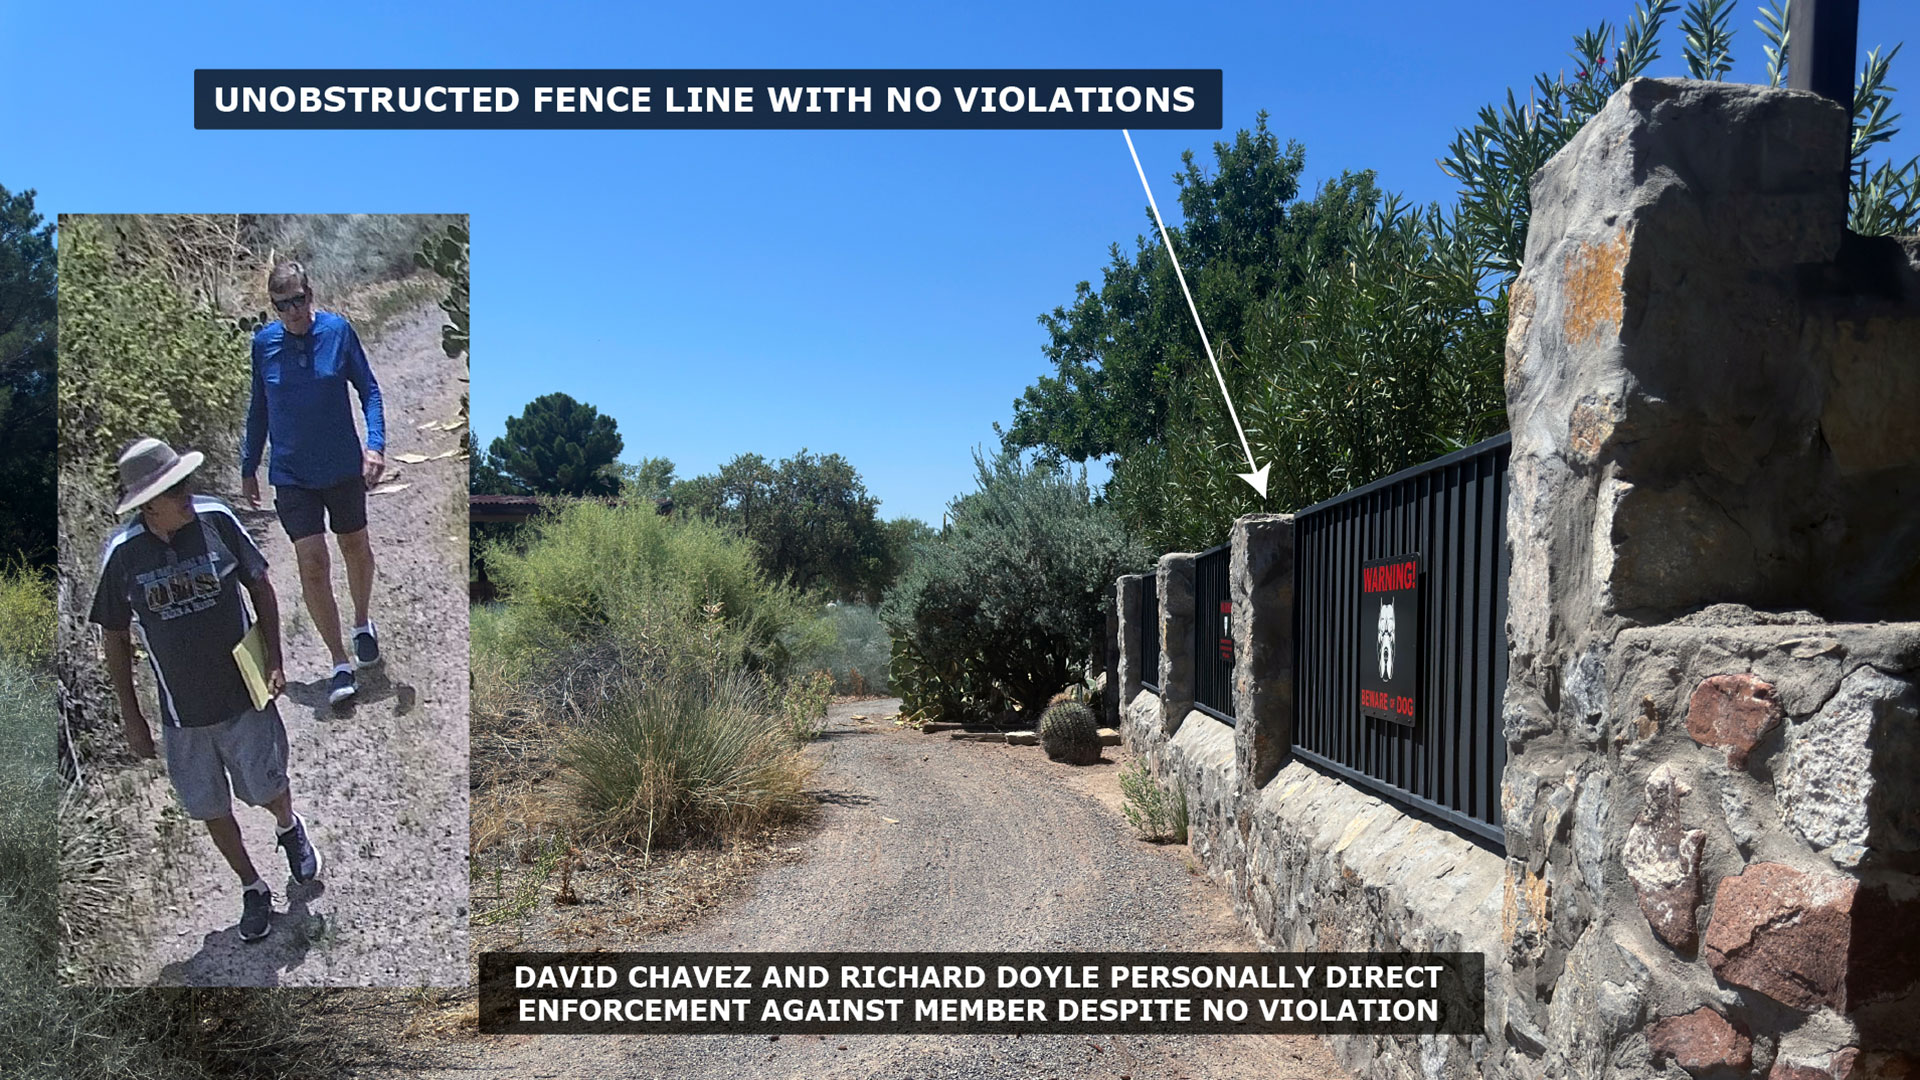 Unobstructed Fence Line with No Violations